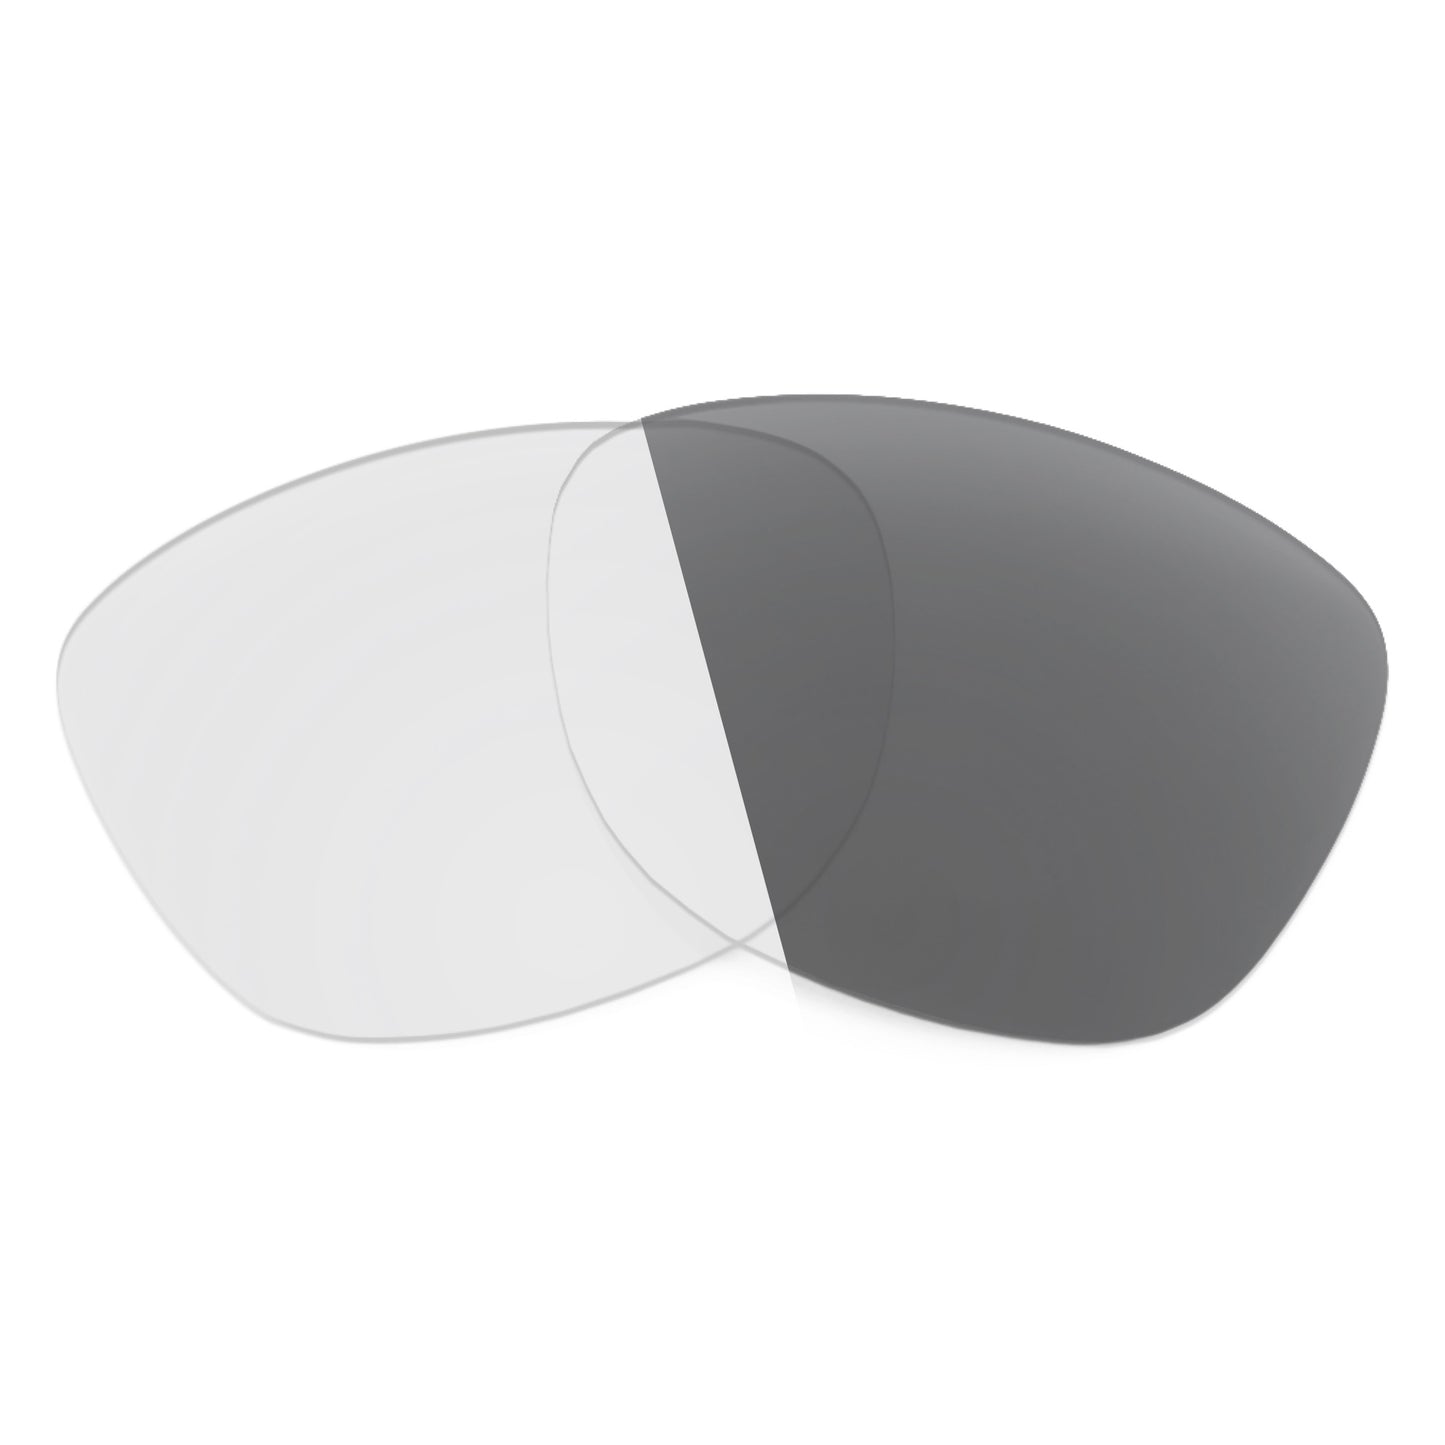 Revant replacement lenses for Nike Chaser Ascent Non-Polarized Adapt Gray Photochromic